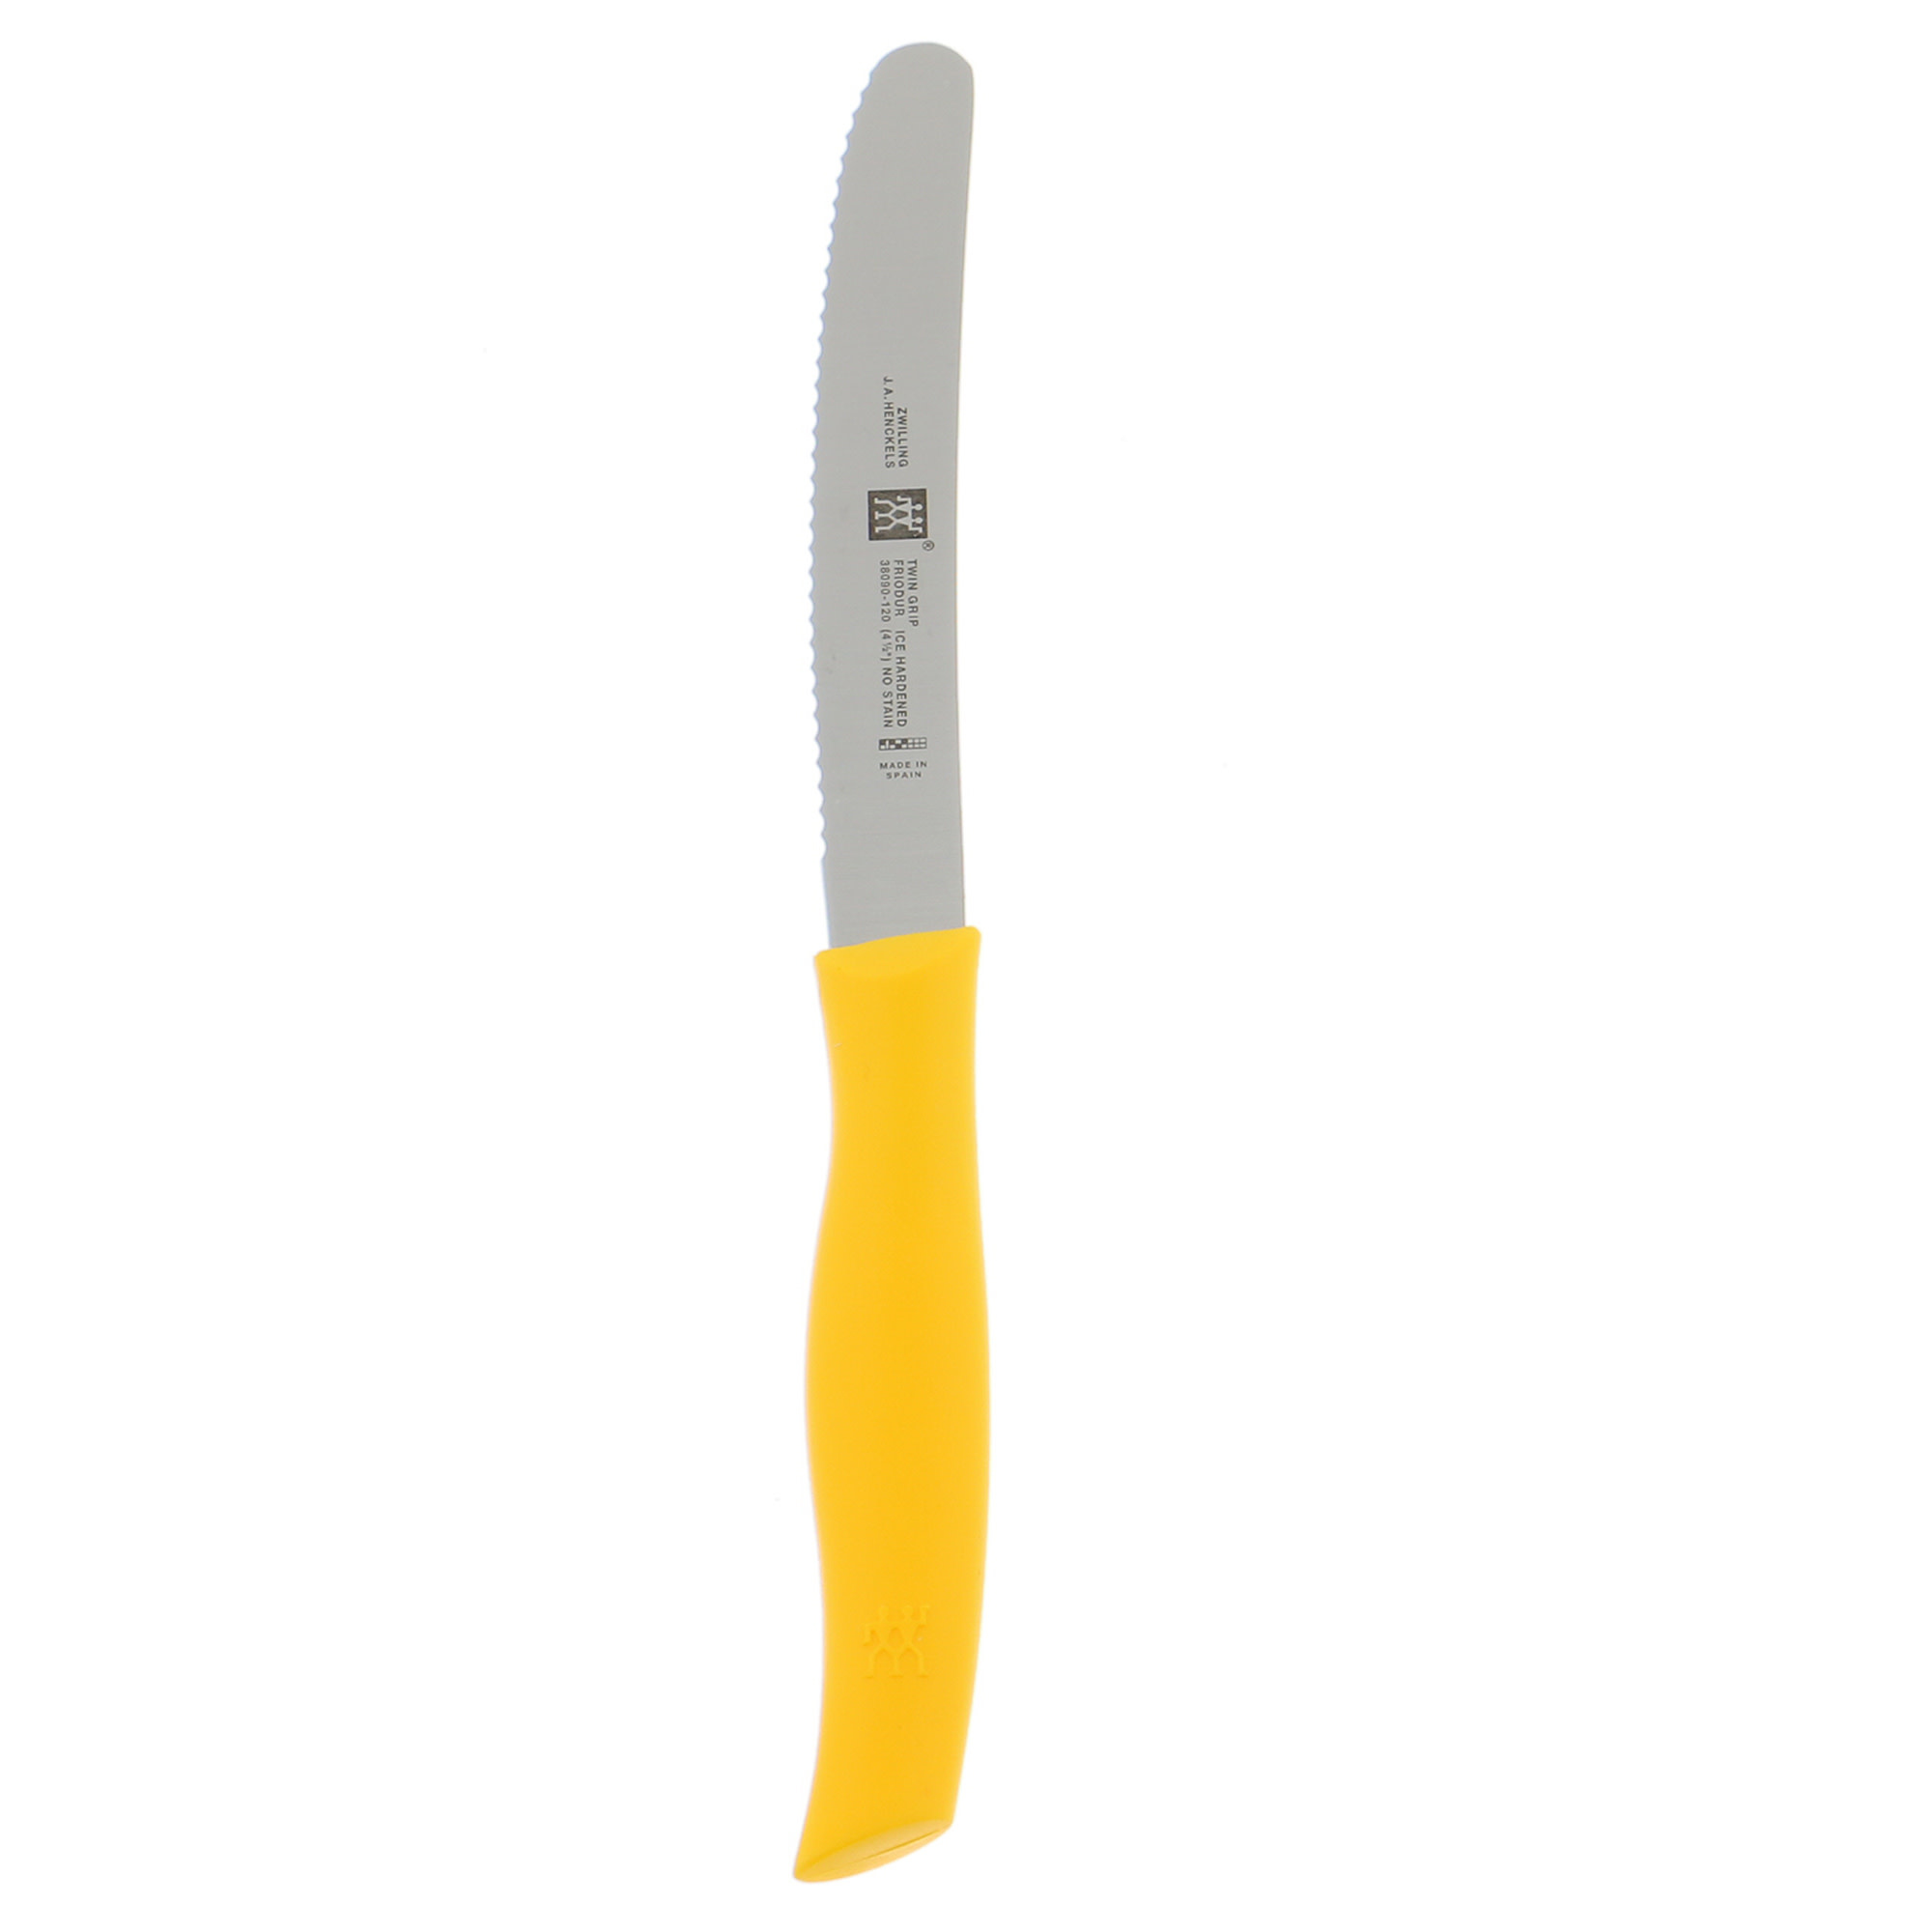 WSL serrated paring knife, 4.5 rounded blue